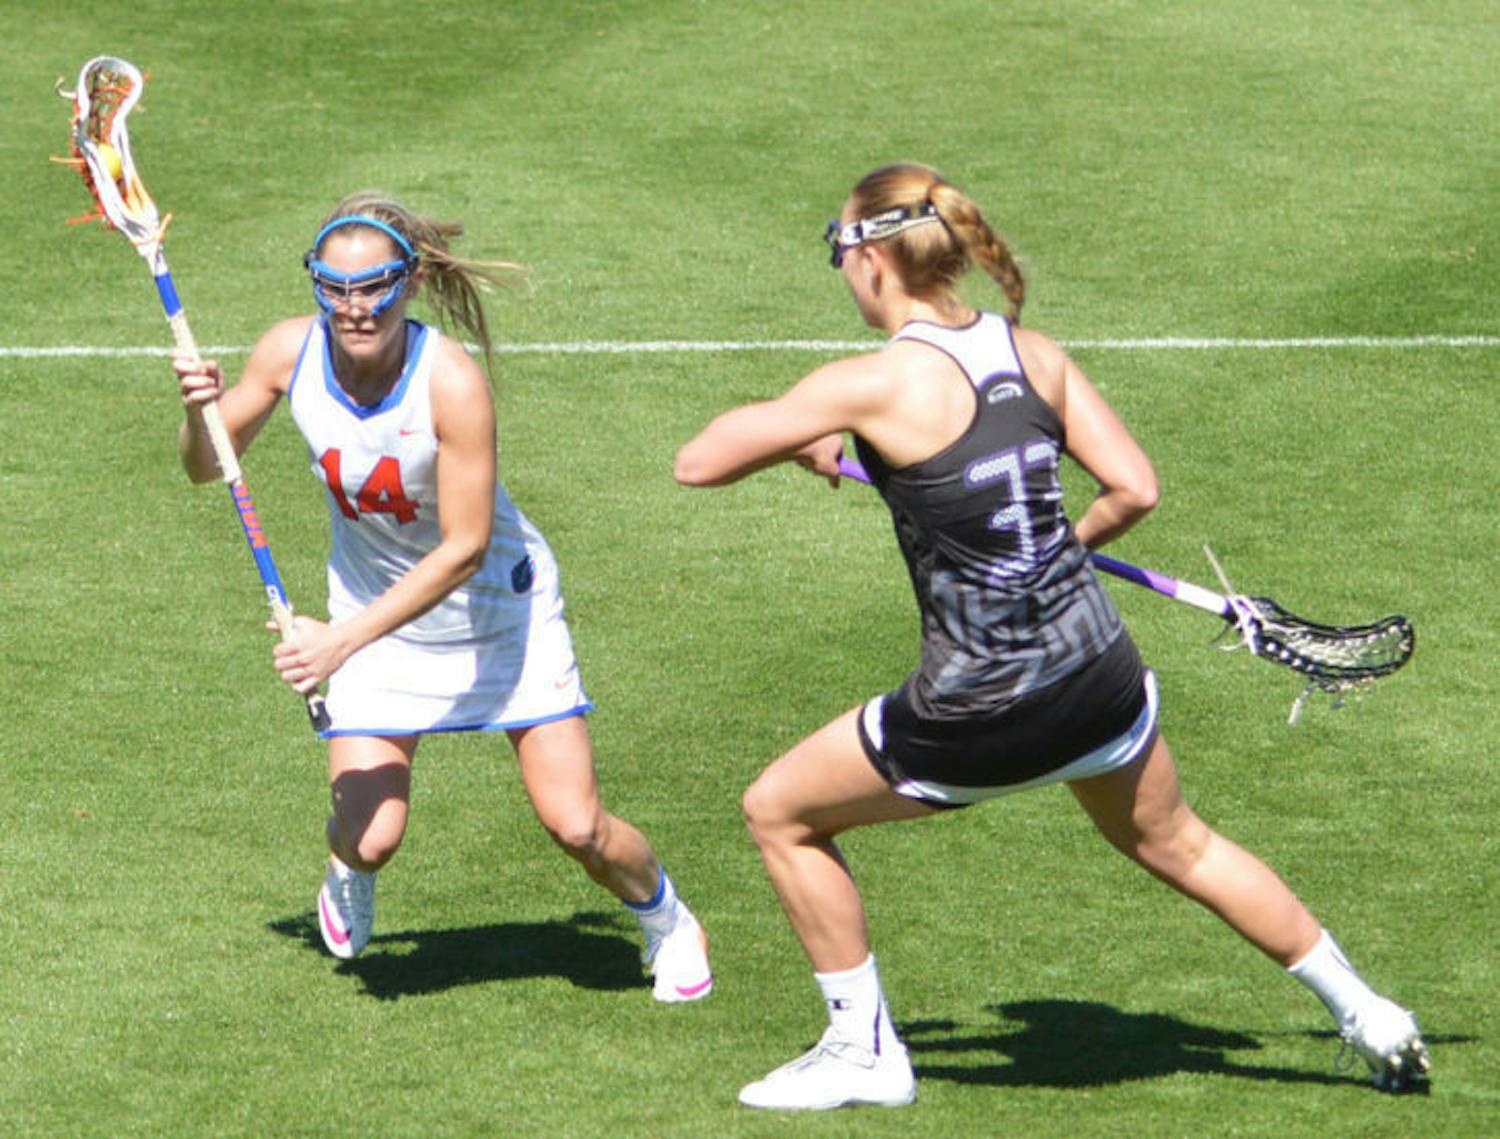 Nora Barry drives the ball toward the net during Florida’s 18-7 win against High Point on Feb. 15 at Donald R. Dizney Stadium. Barry scored the game-winning goal against Northwestern on Sunday to help the Gators clinch the American Lacrosse Conference Tournament title.